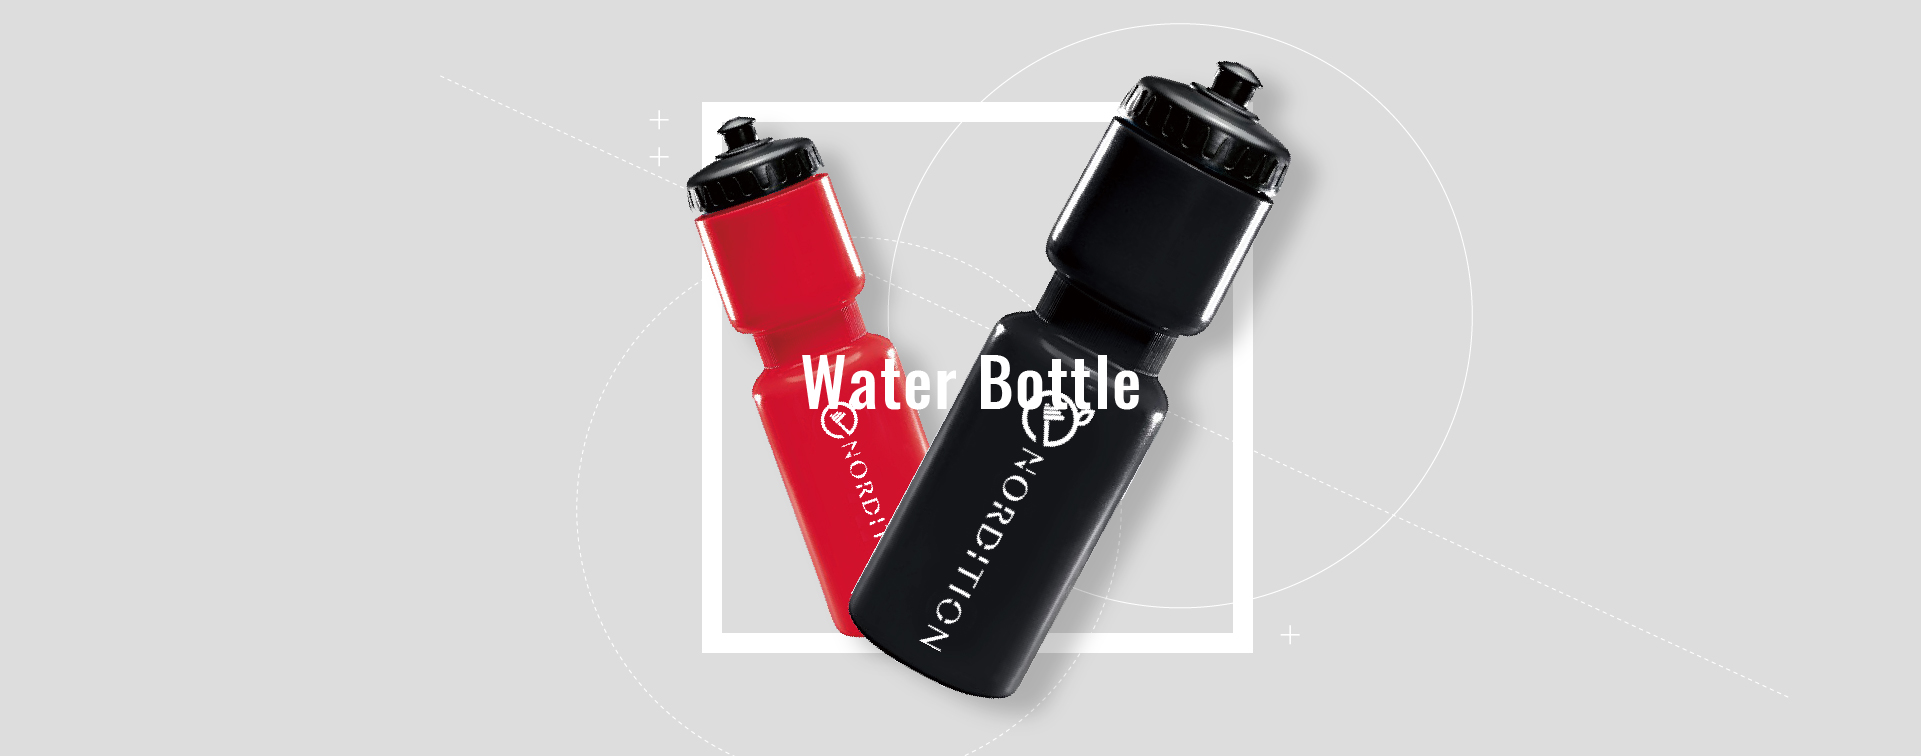 Nordition Sporting Water Bottle, Bike Bottle, Made in Taiwan, Factory, Customized, OEM